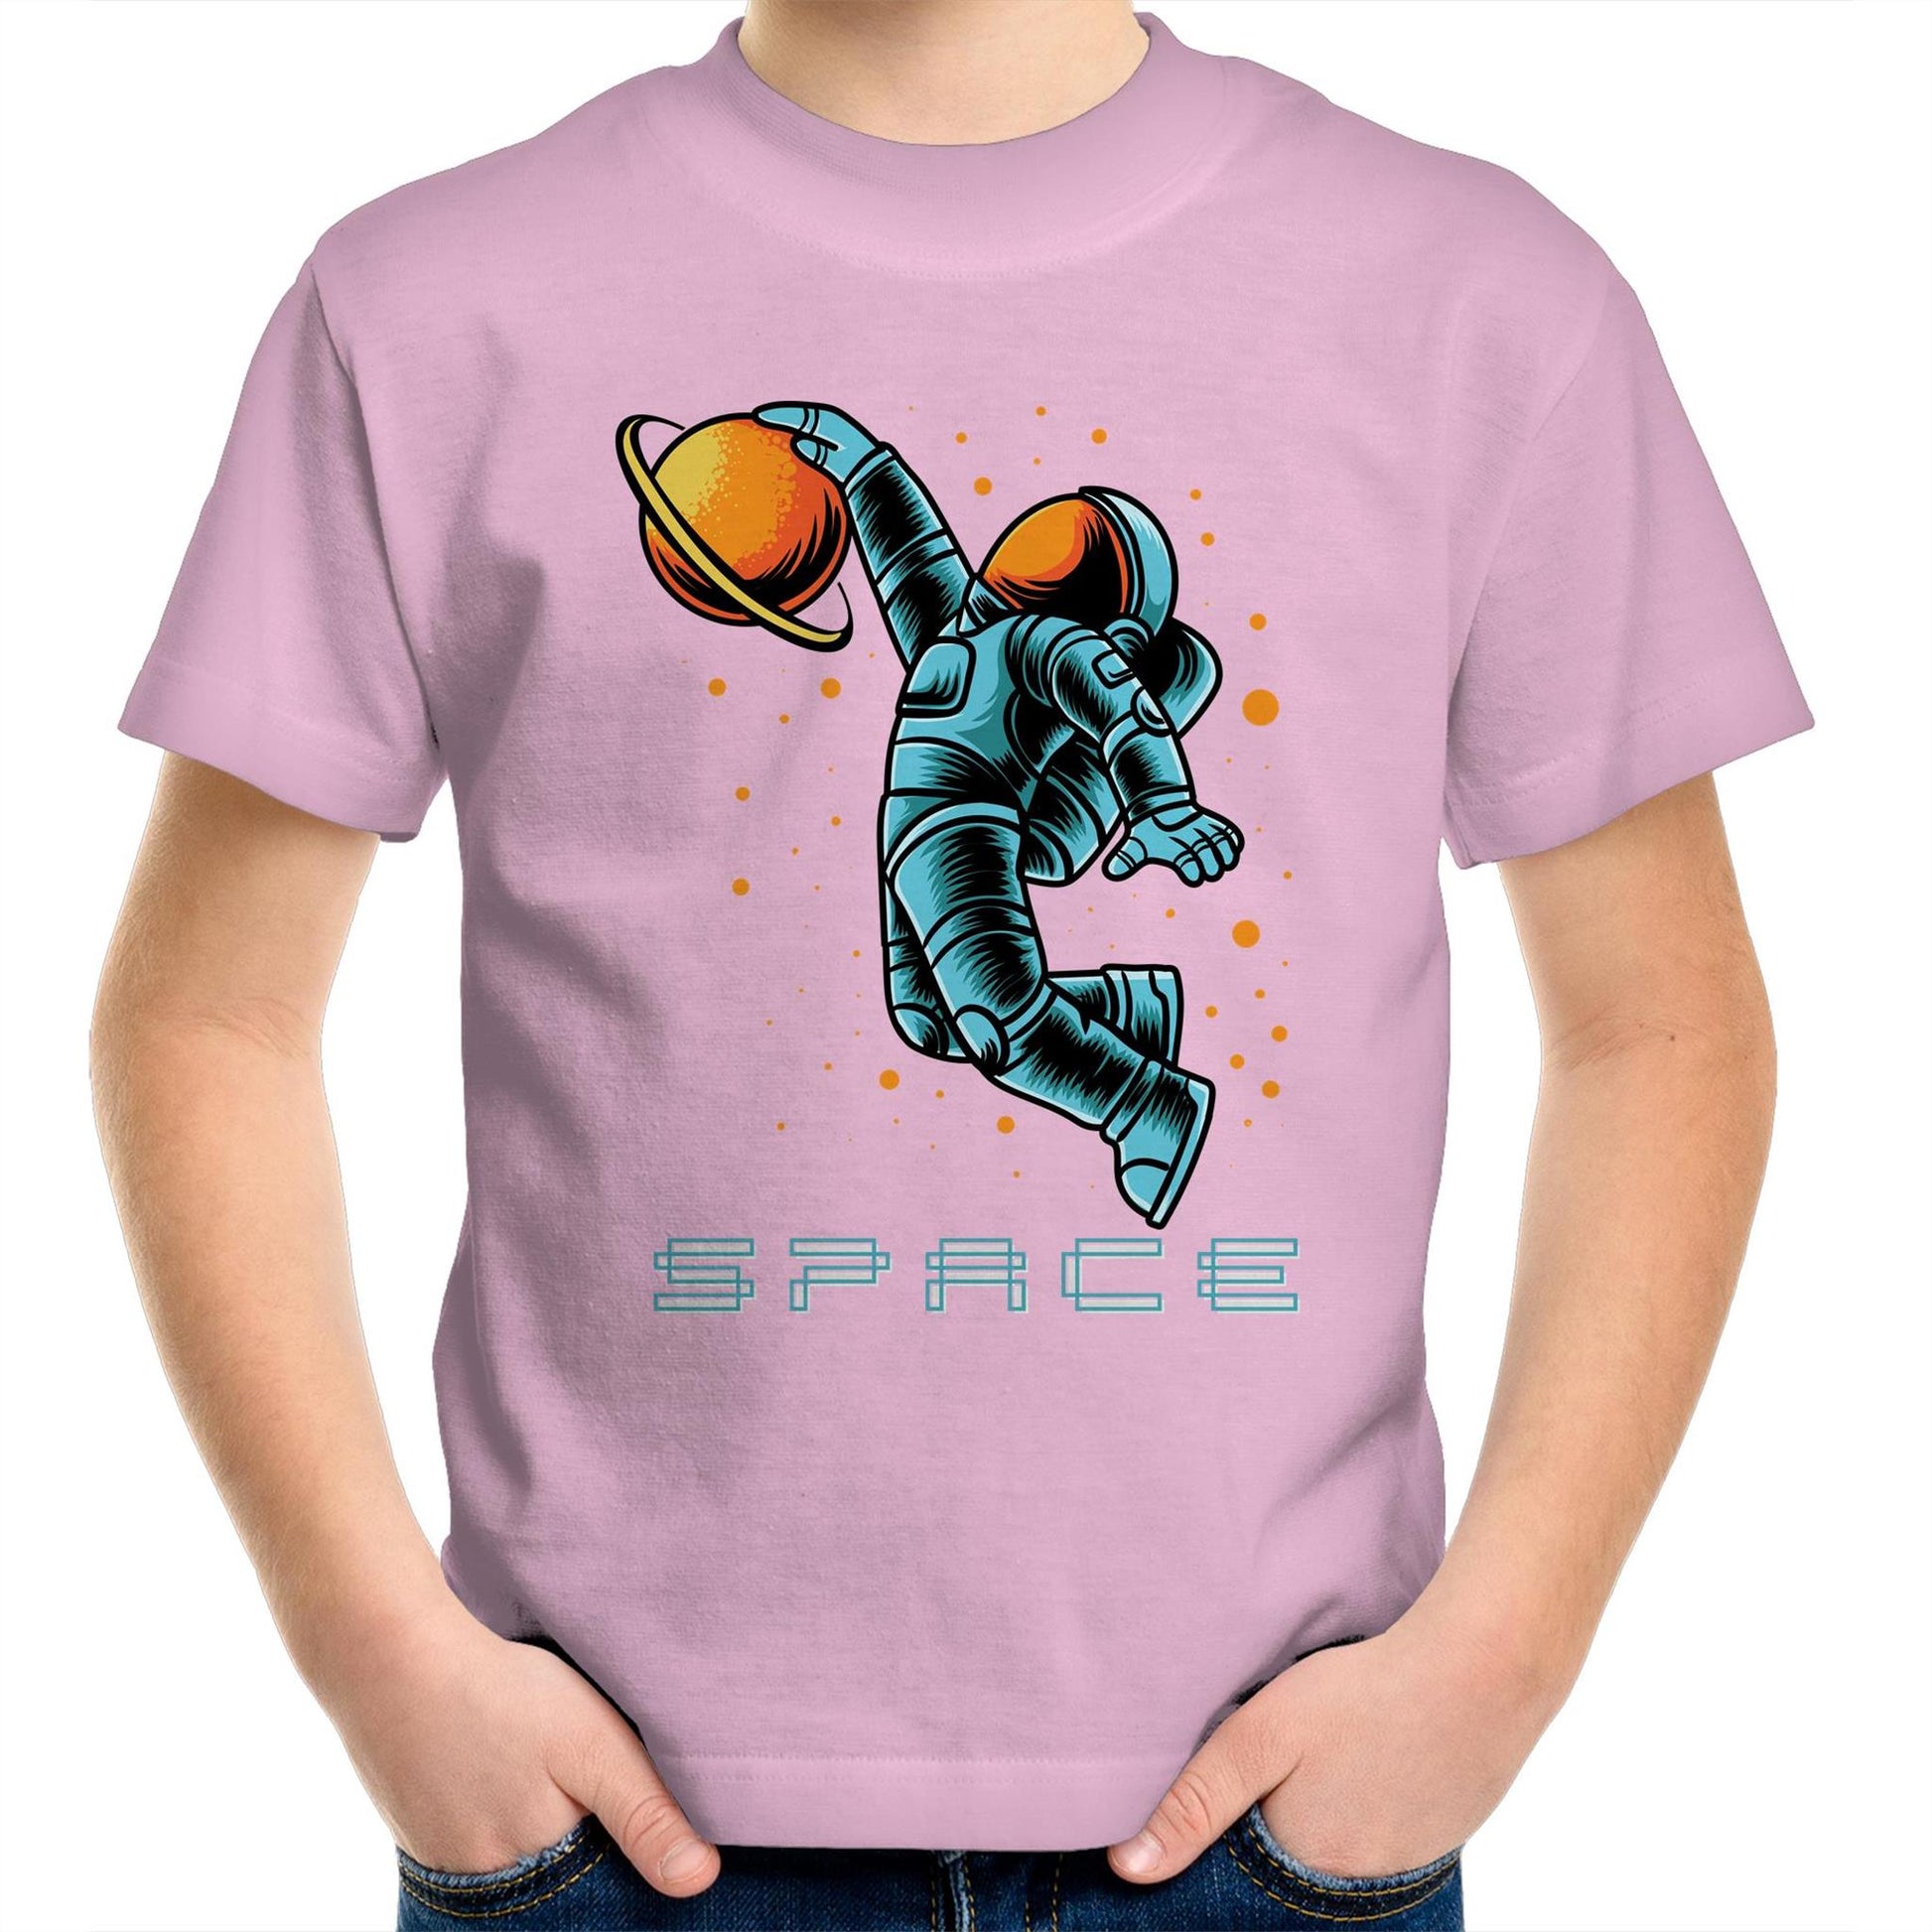 Astronaut Basketball - Kids Youth Crew T-Shirt Pink Kids Youth T-shirt Space